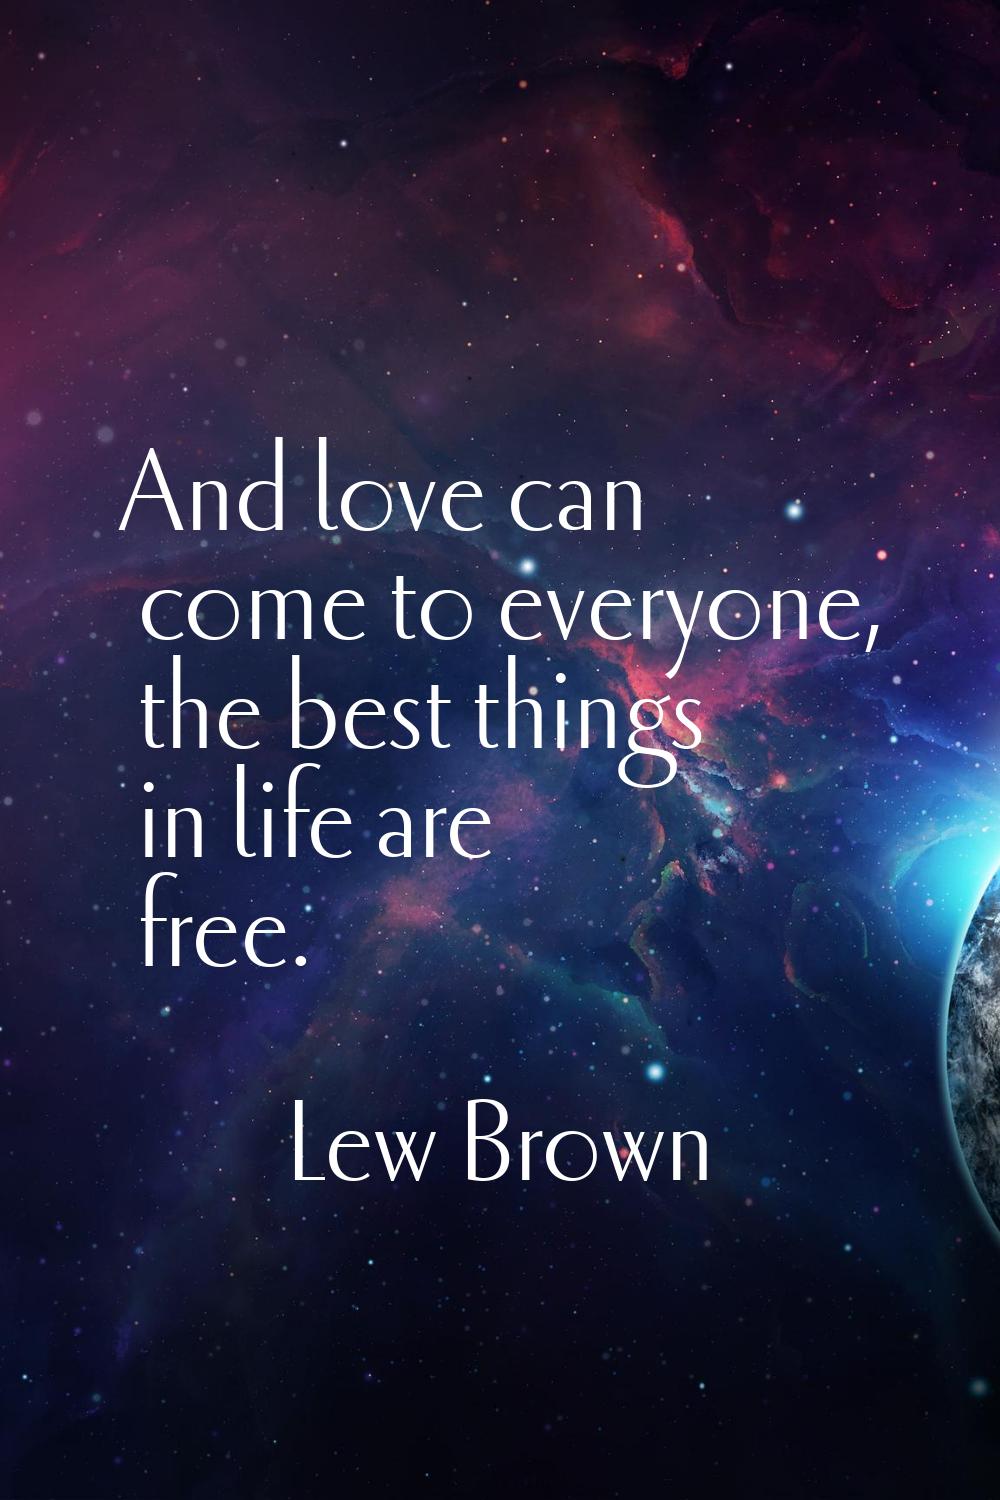 And love can come to everyone, the best things in life are free.